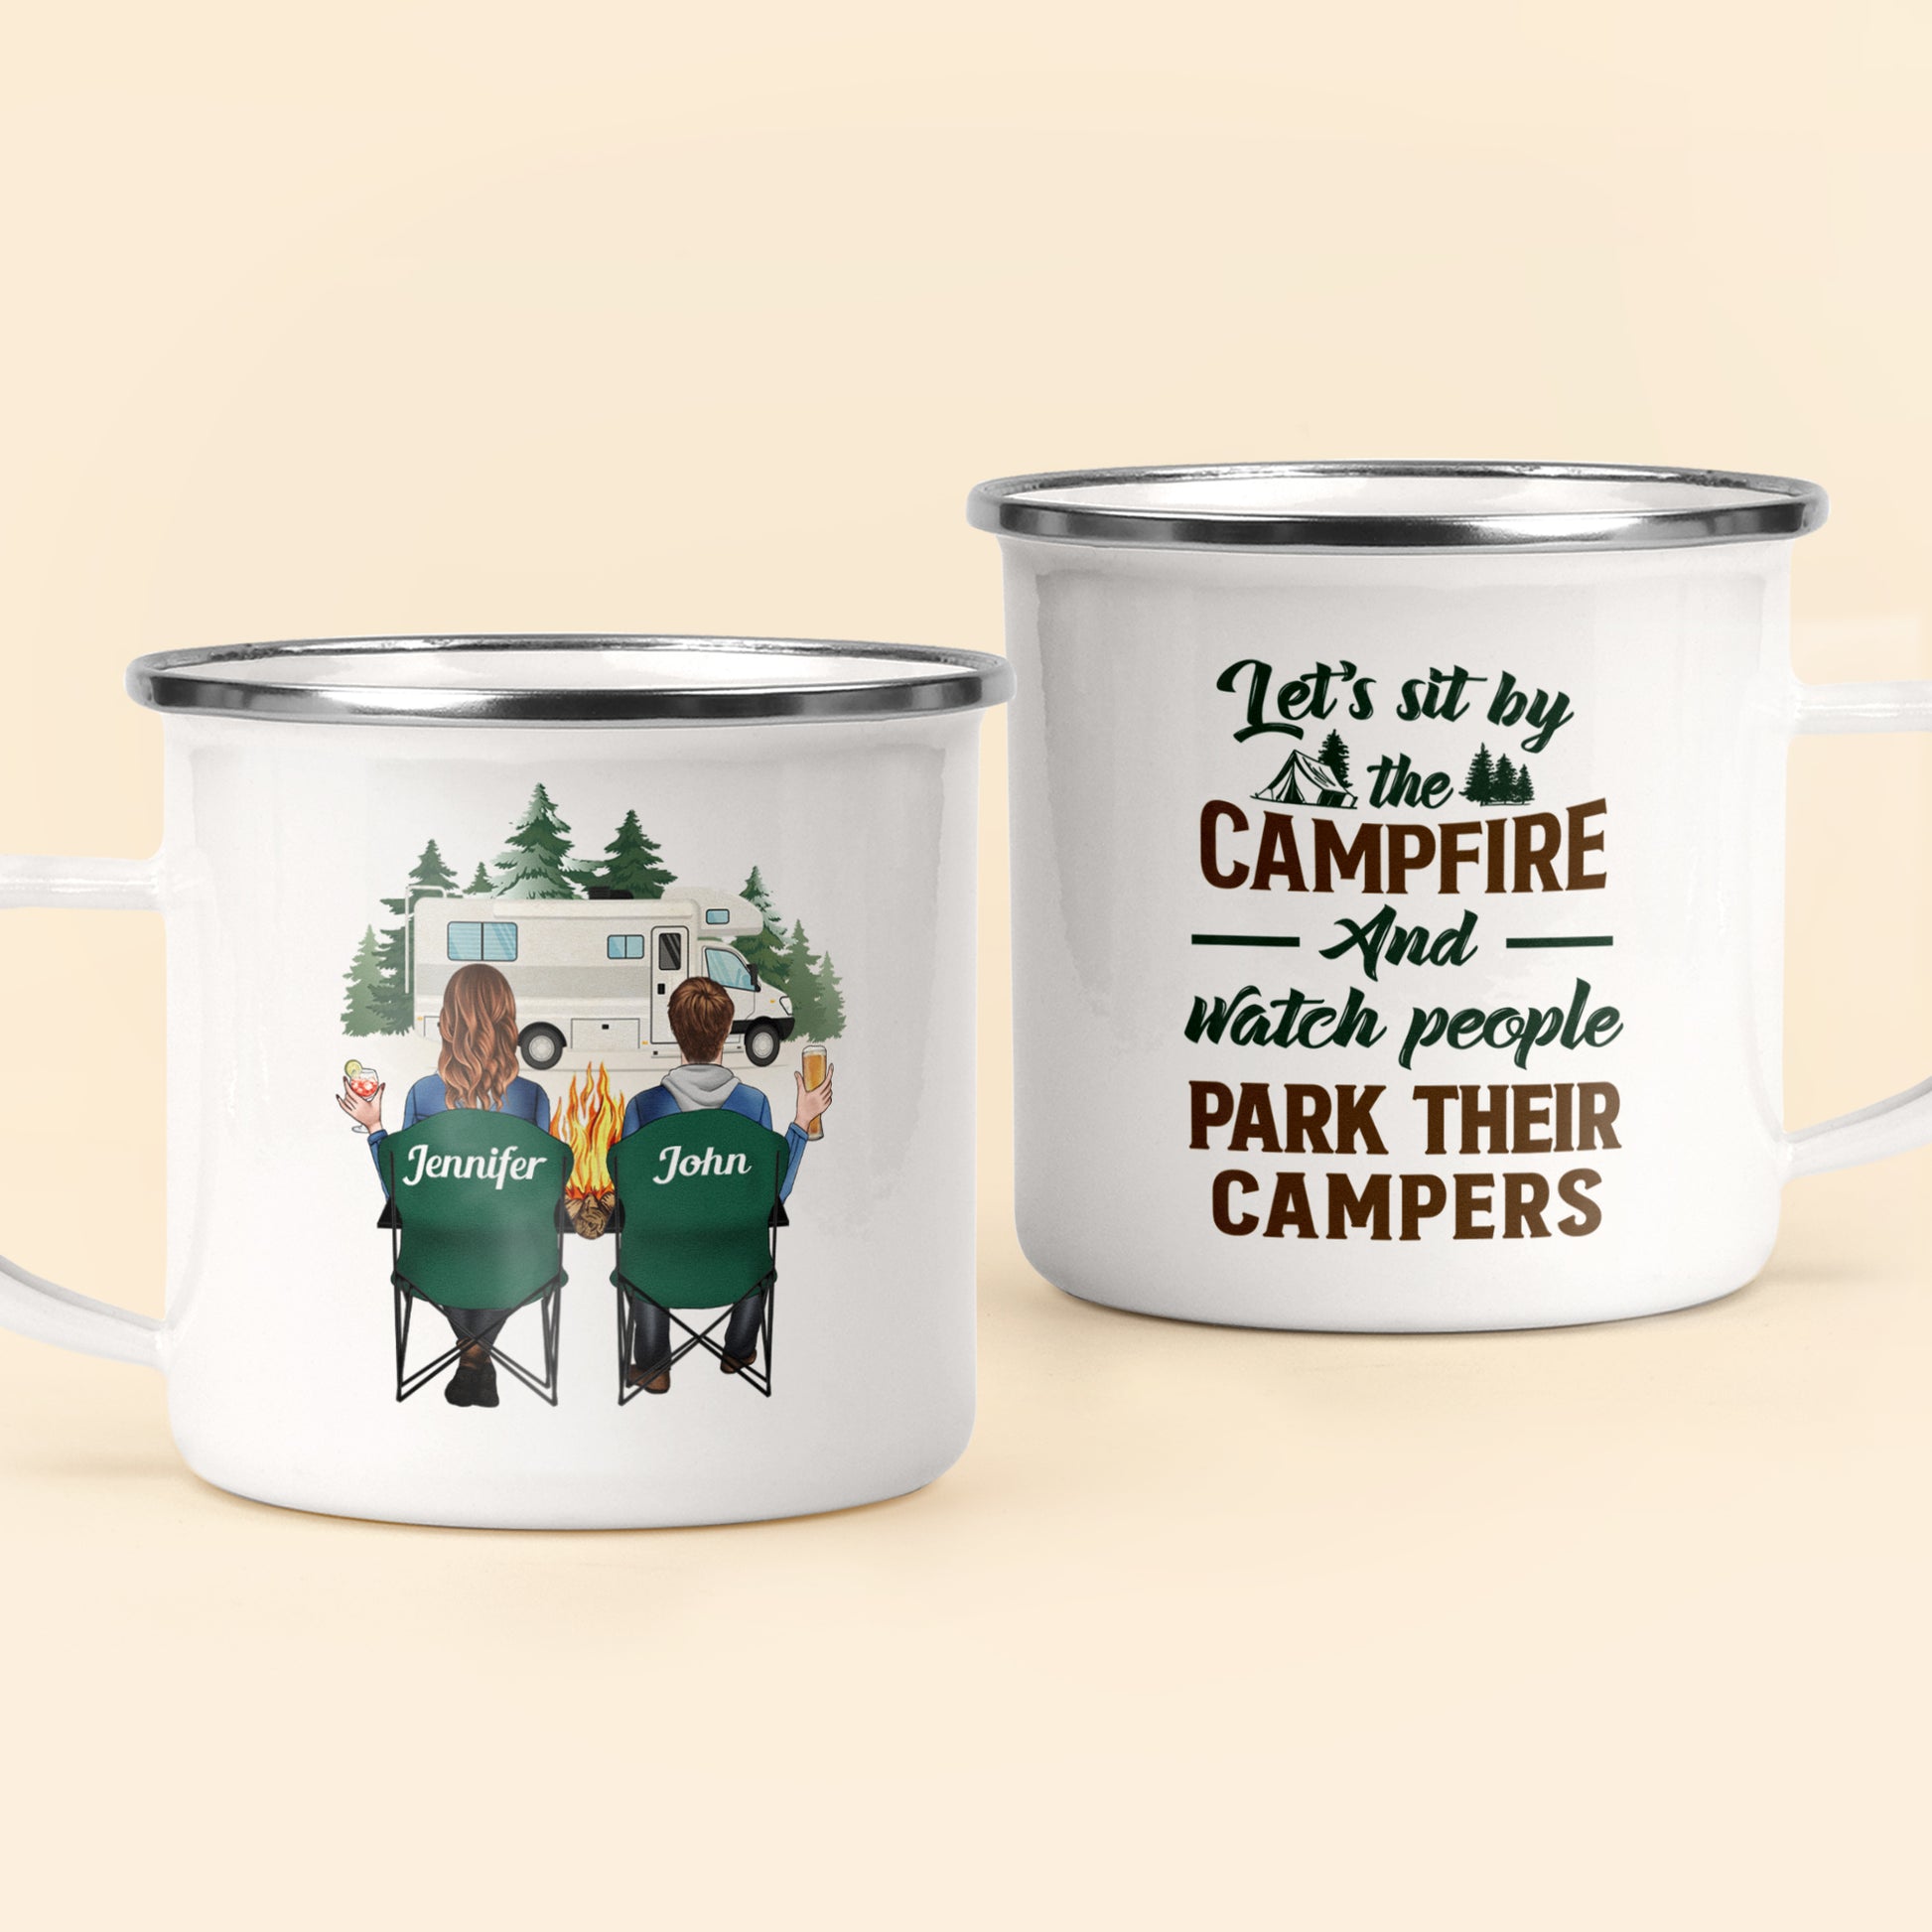 Let's Sit By The Campfire & Watch People Park Their Campers - Personalized Enamel Mug  - Birthday Gift For Camping Friends